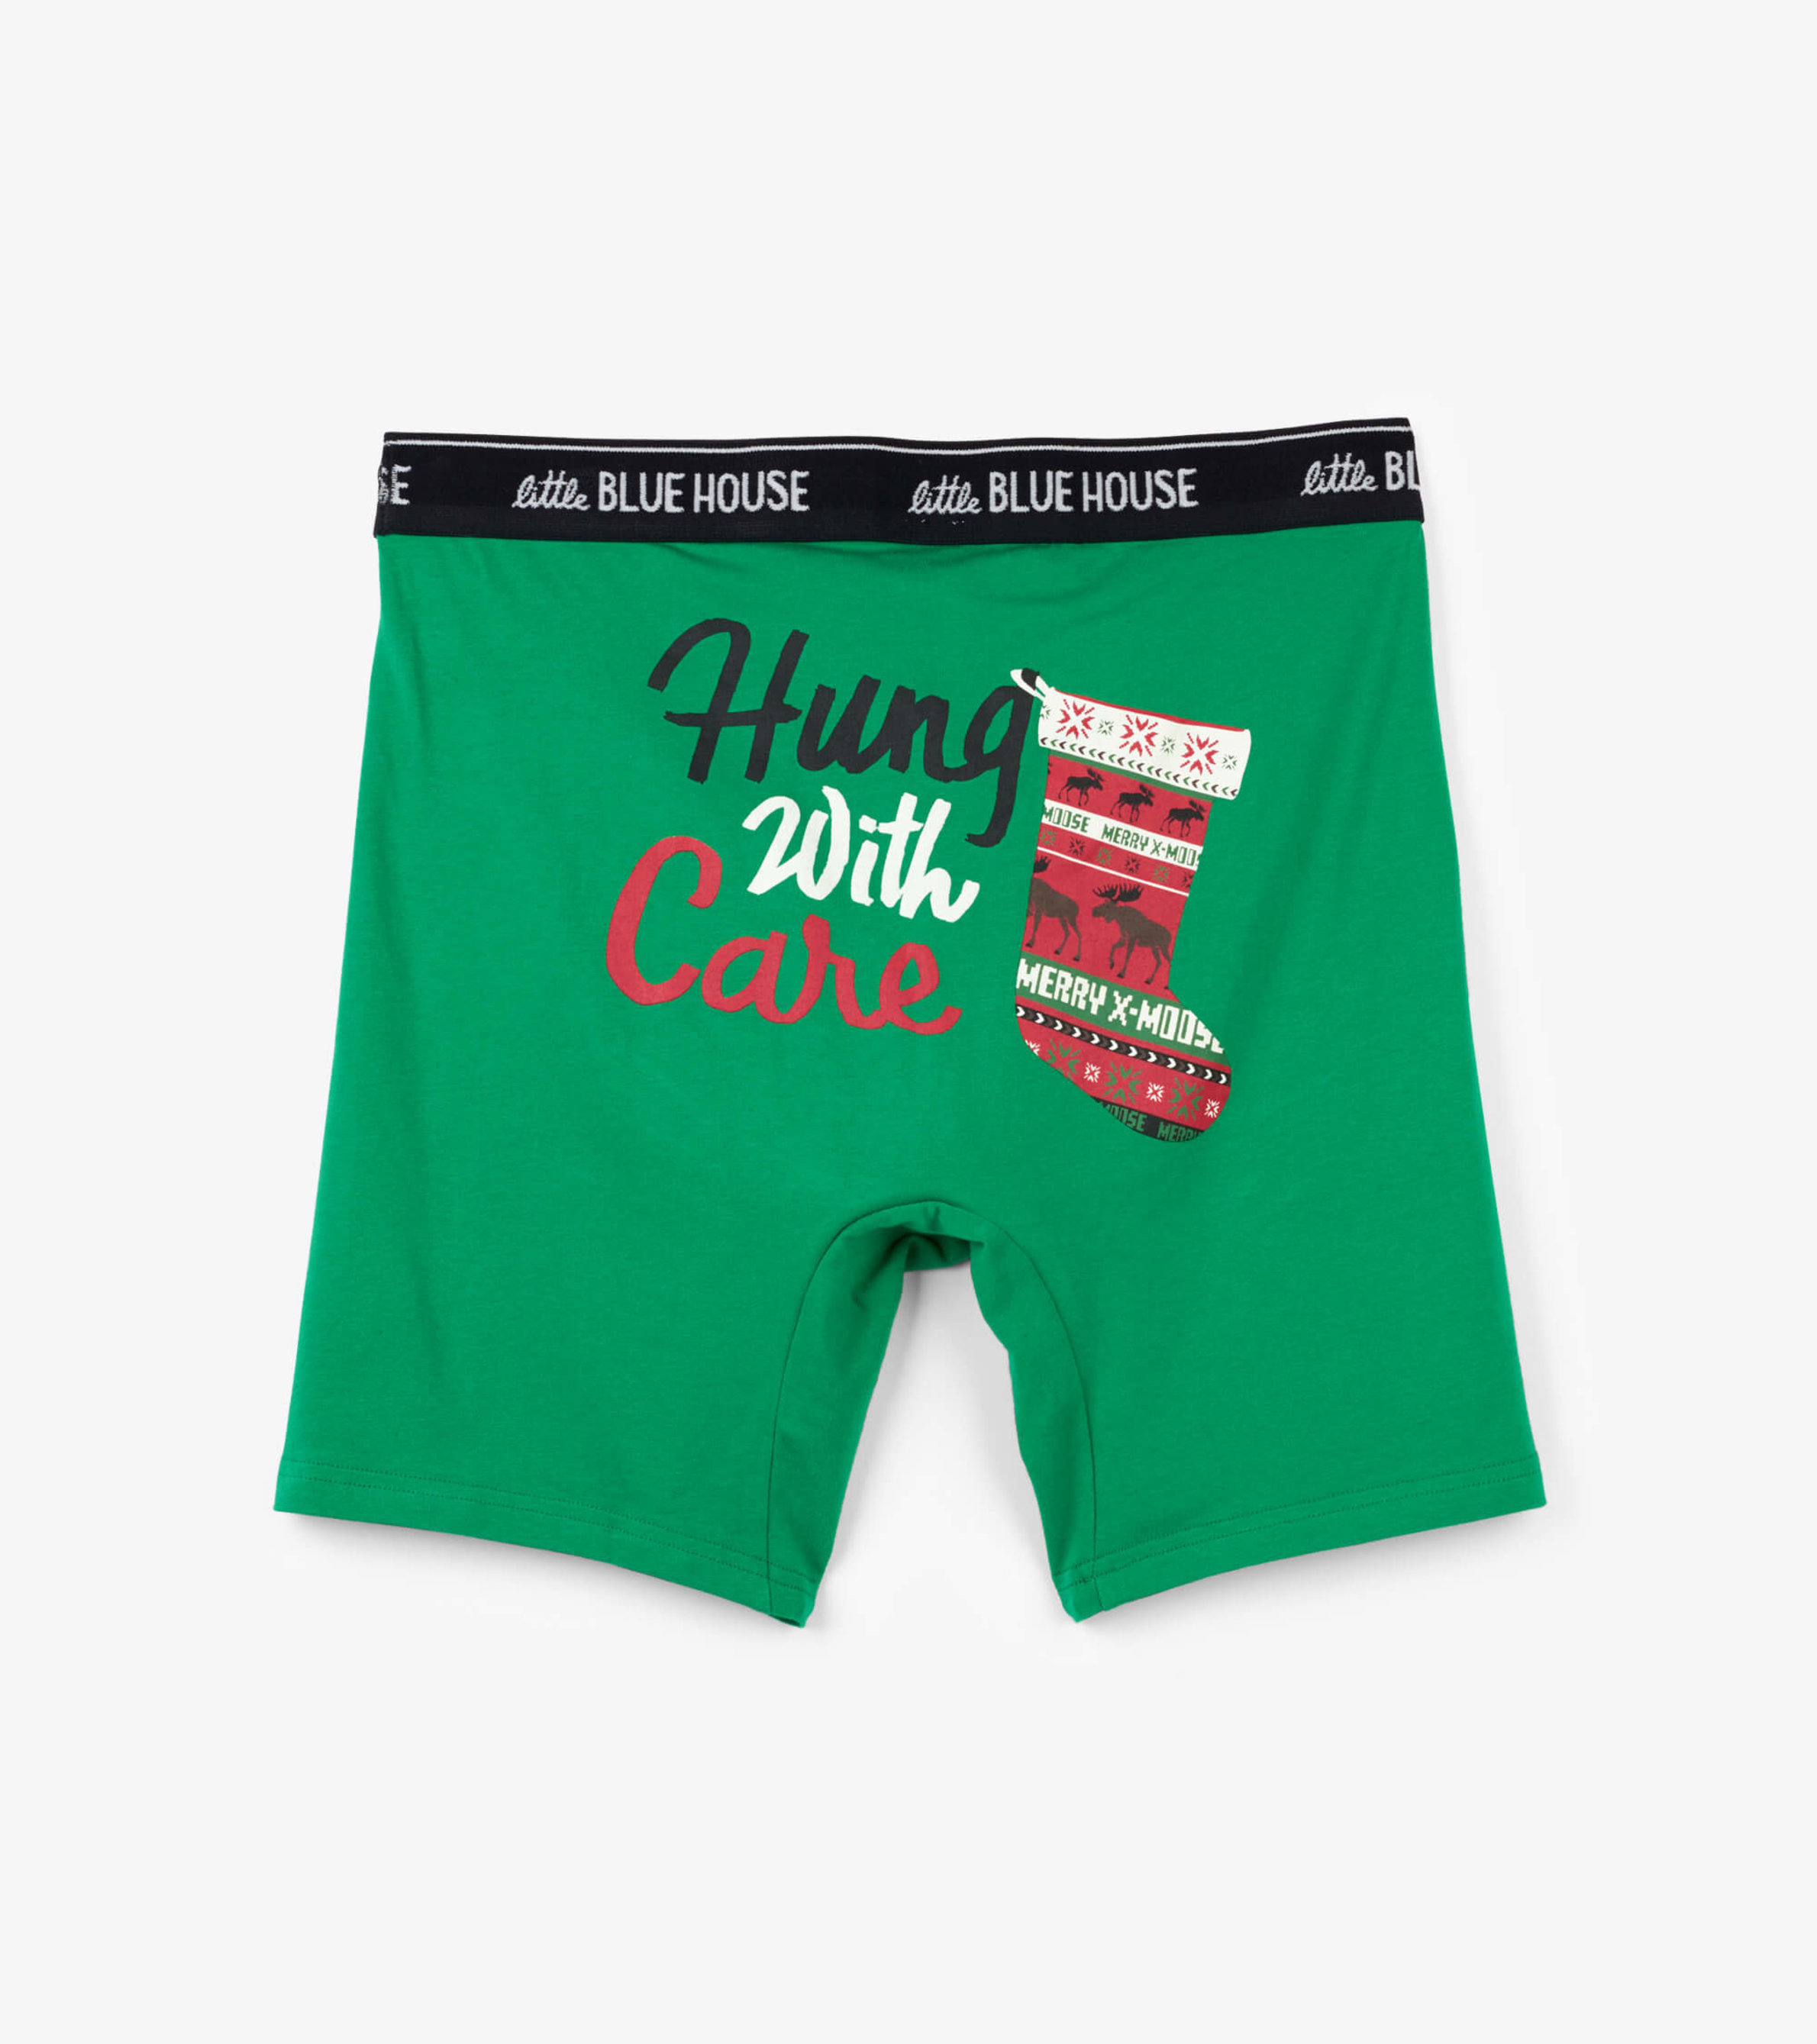 https://cdn.littlebluehouse.com/product_images/hung-with-care-mens-boxer-briefs/BXCHUNG001_B_jpg/pdp_zoom.jpg?c=1600447652&locale=us_en